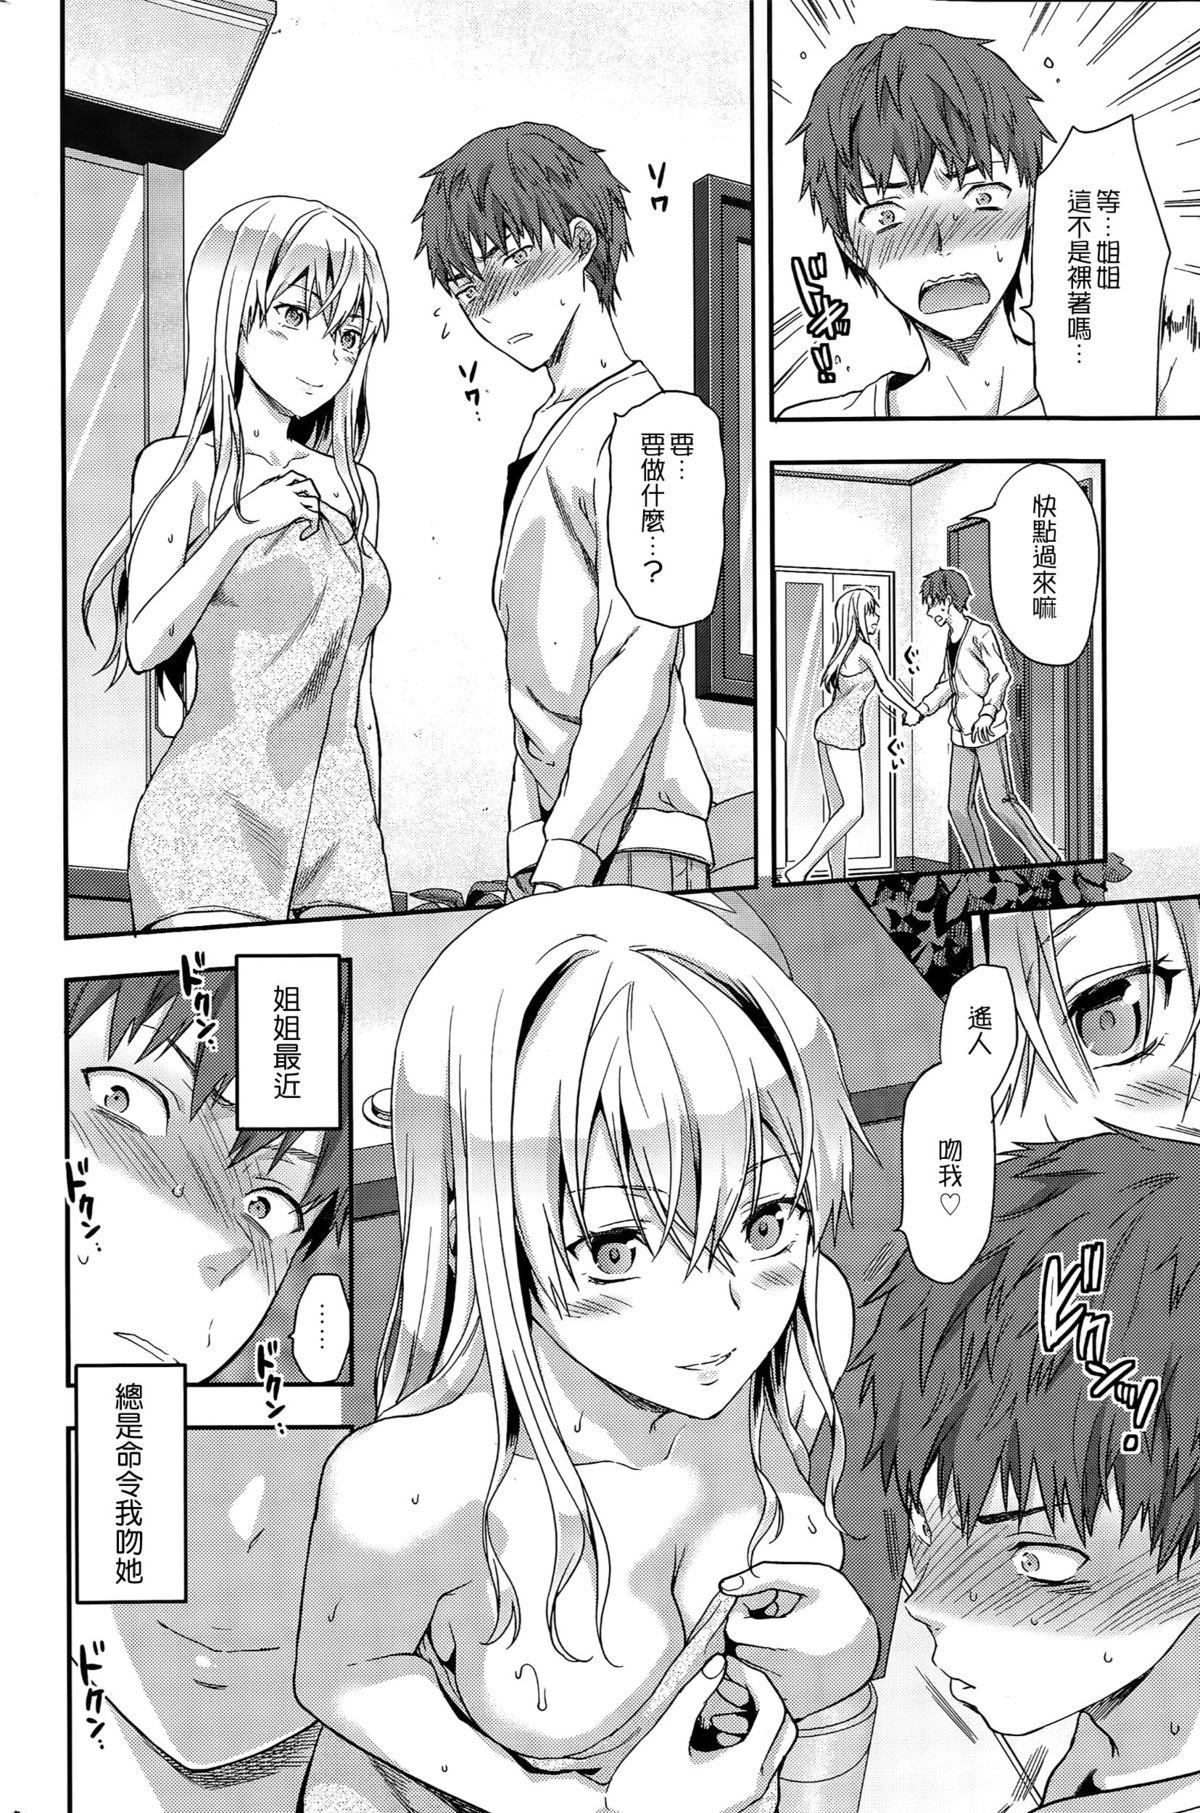 Yanks Featured 女子力研究合集vol.1 Perverted - Page 5